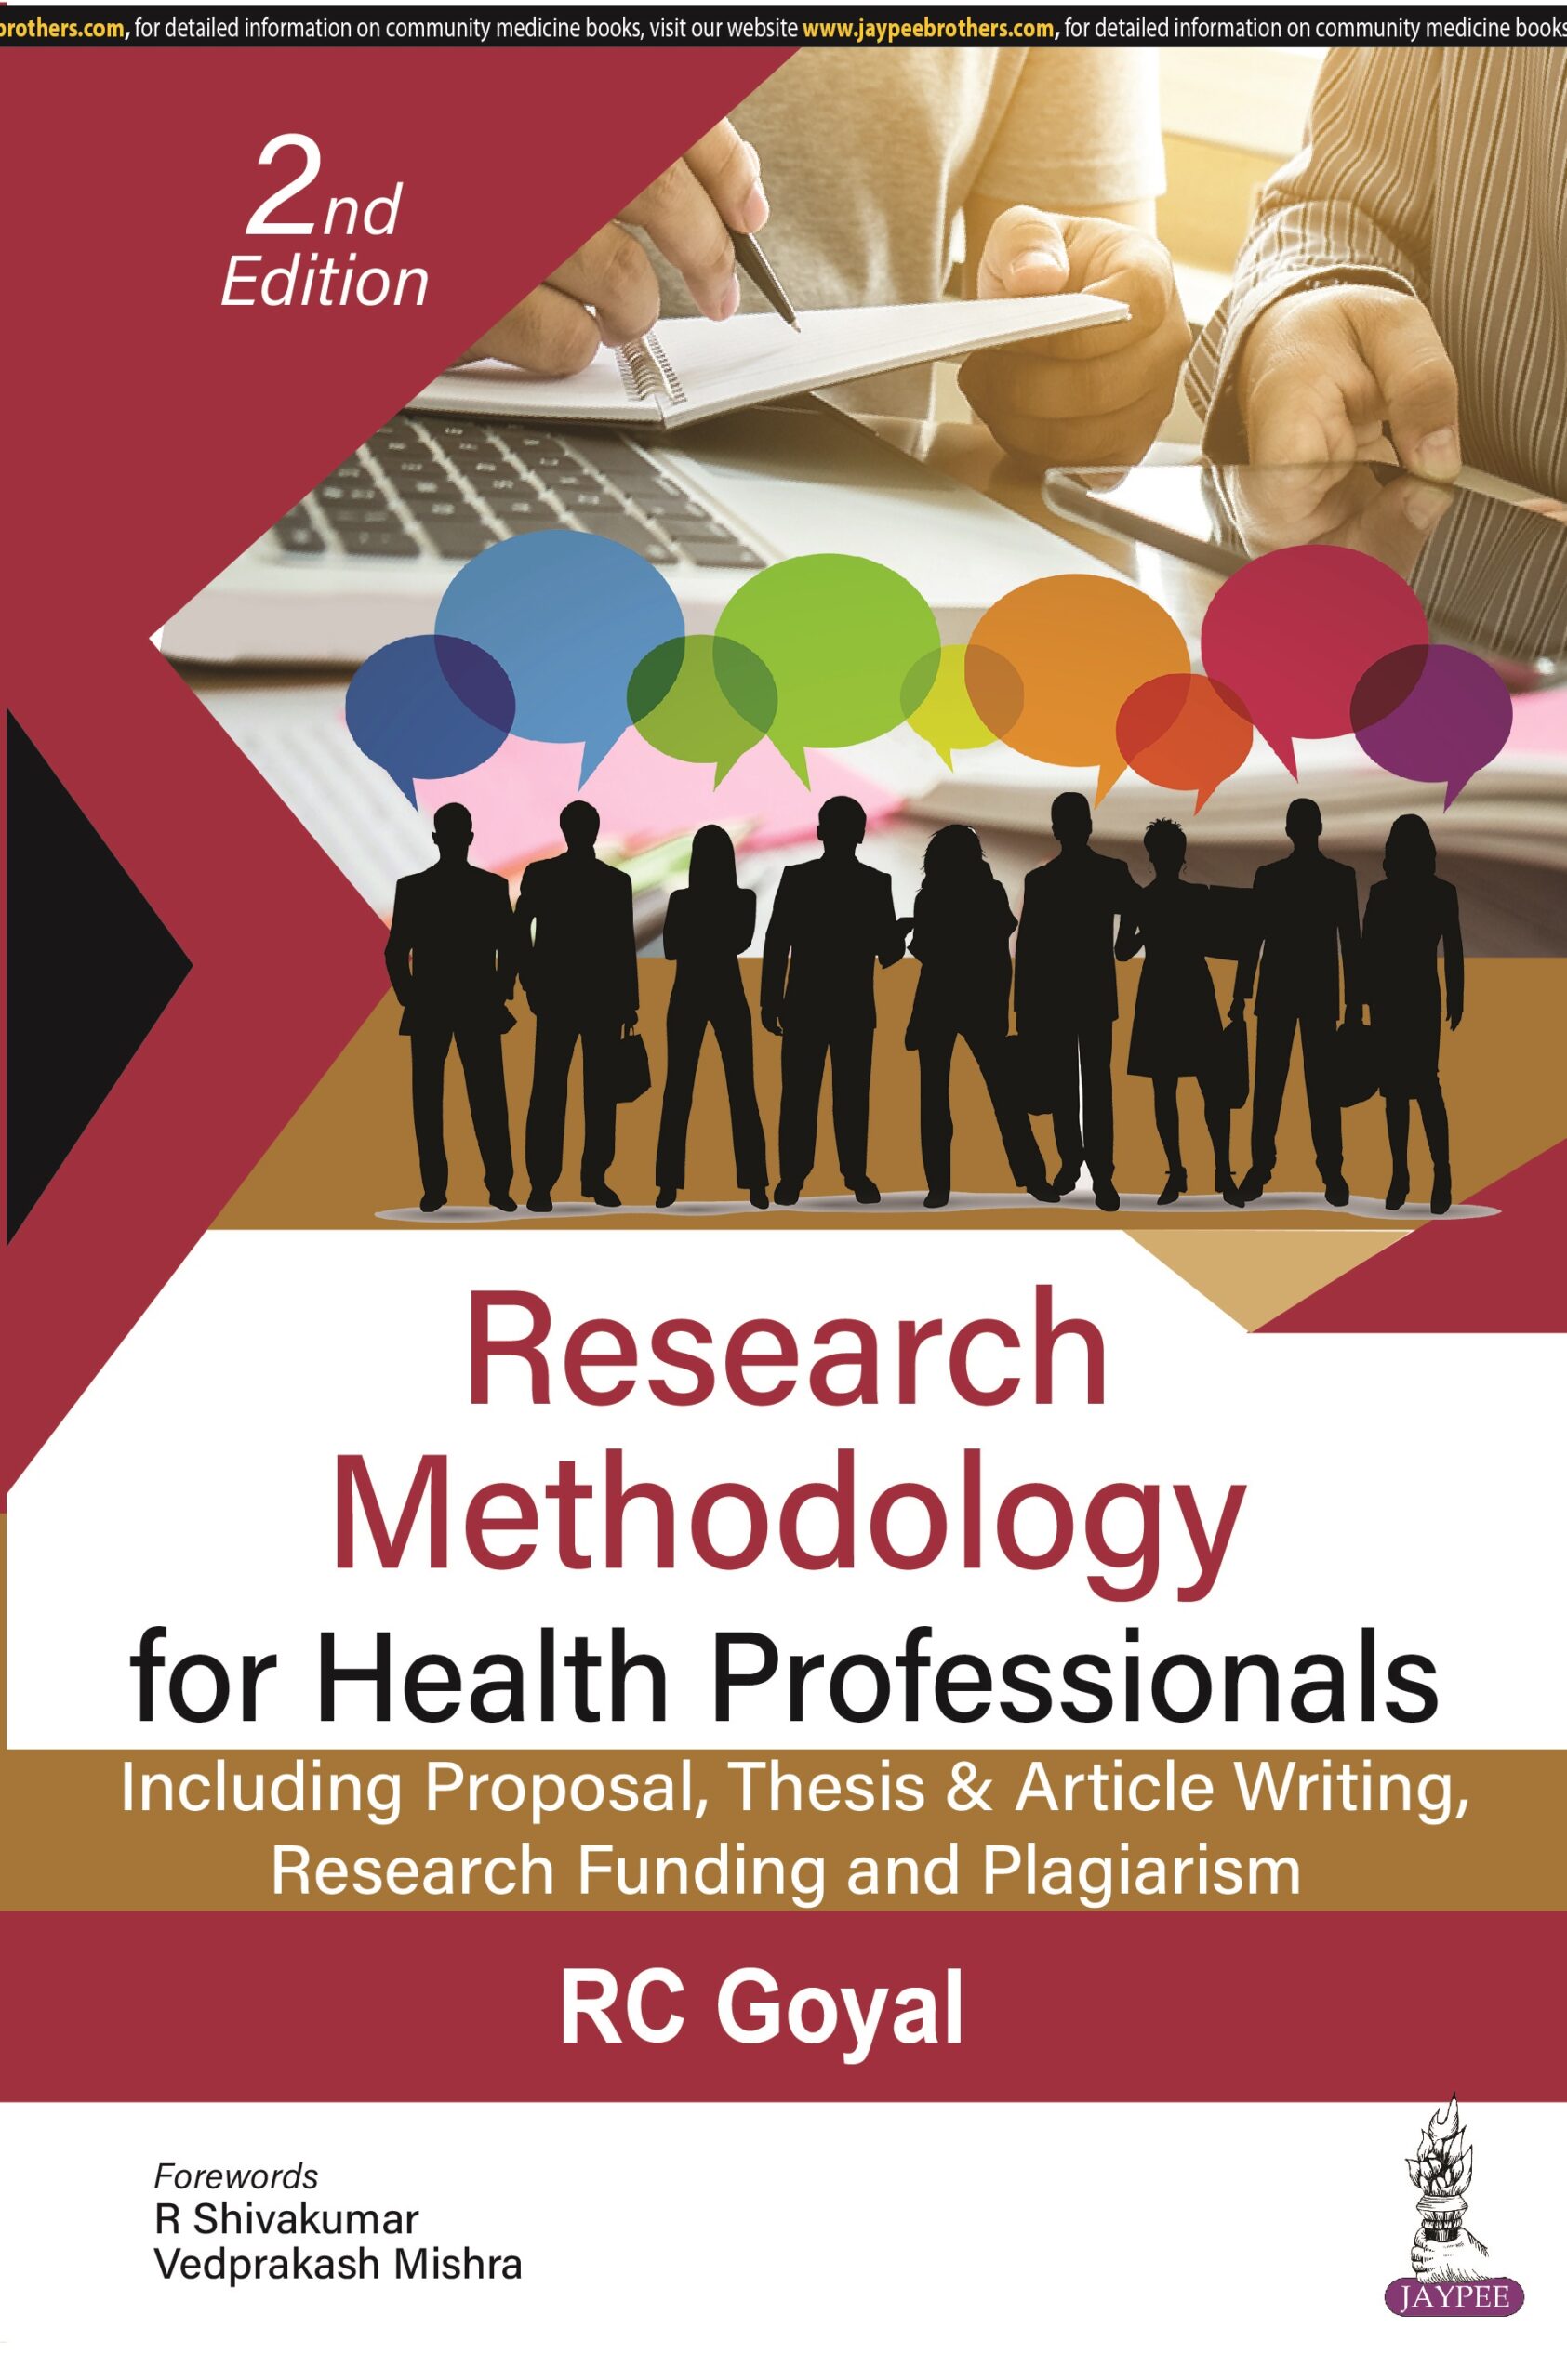 Proposal,　RC　Goyal　Research　Article　and　Writing,　Drcart　Methodology　Funding　Plagiarism　by　for　Health　Thesis　Professionals:　Including　Research